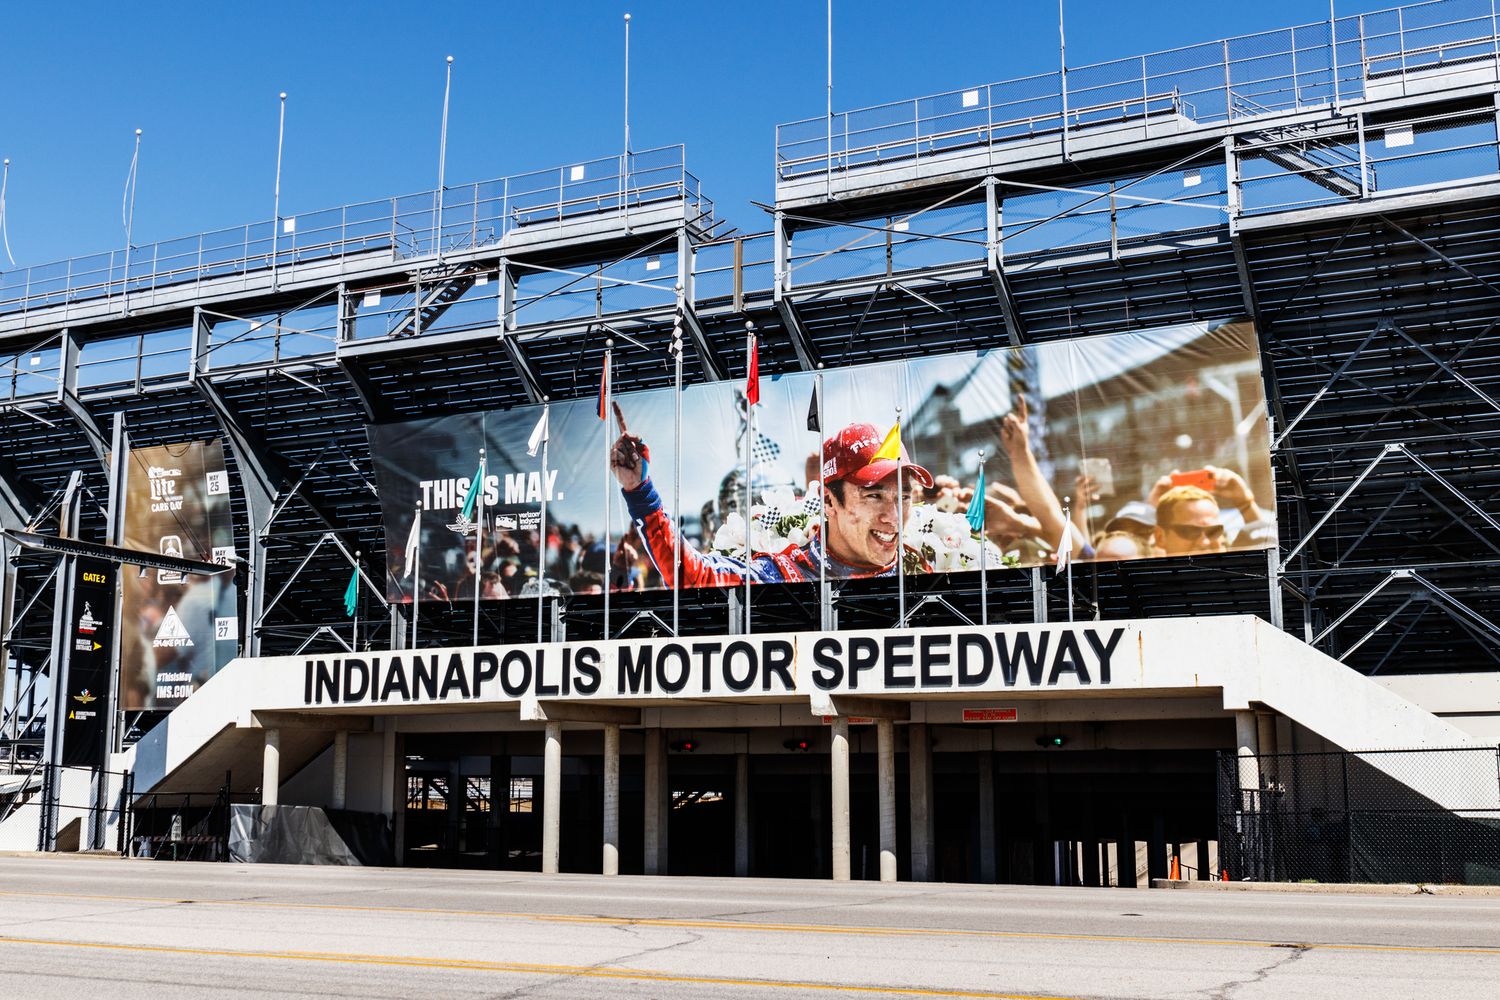 Fast Friday at the Indianapolis Motor Speedway